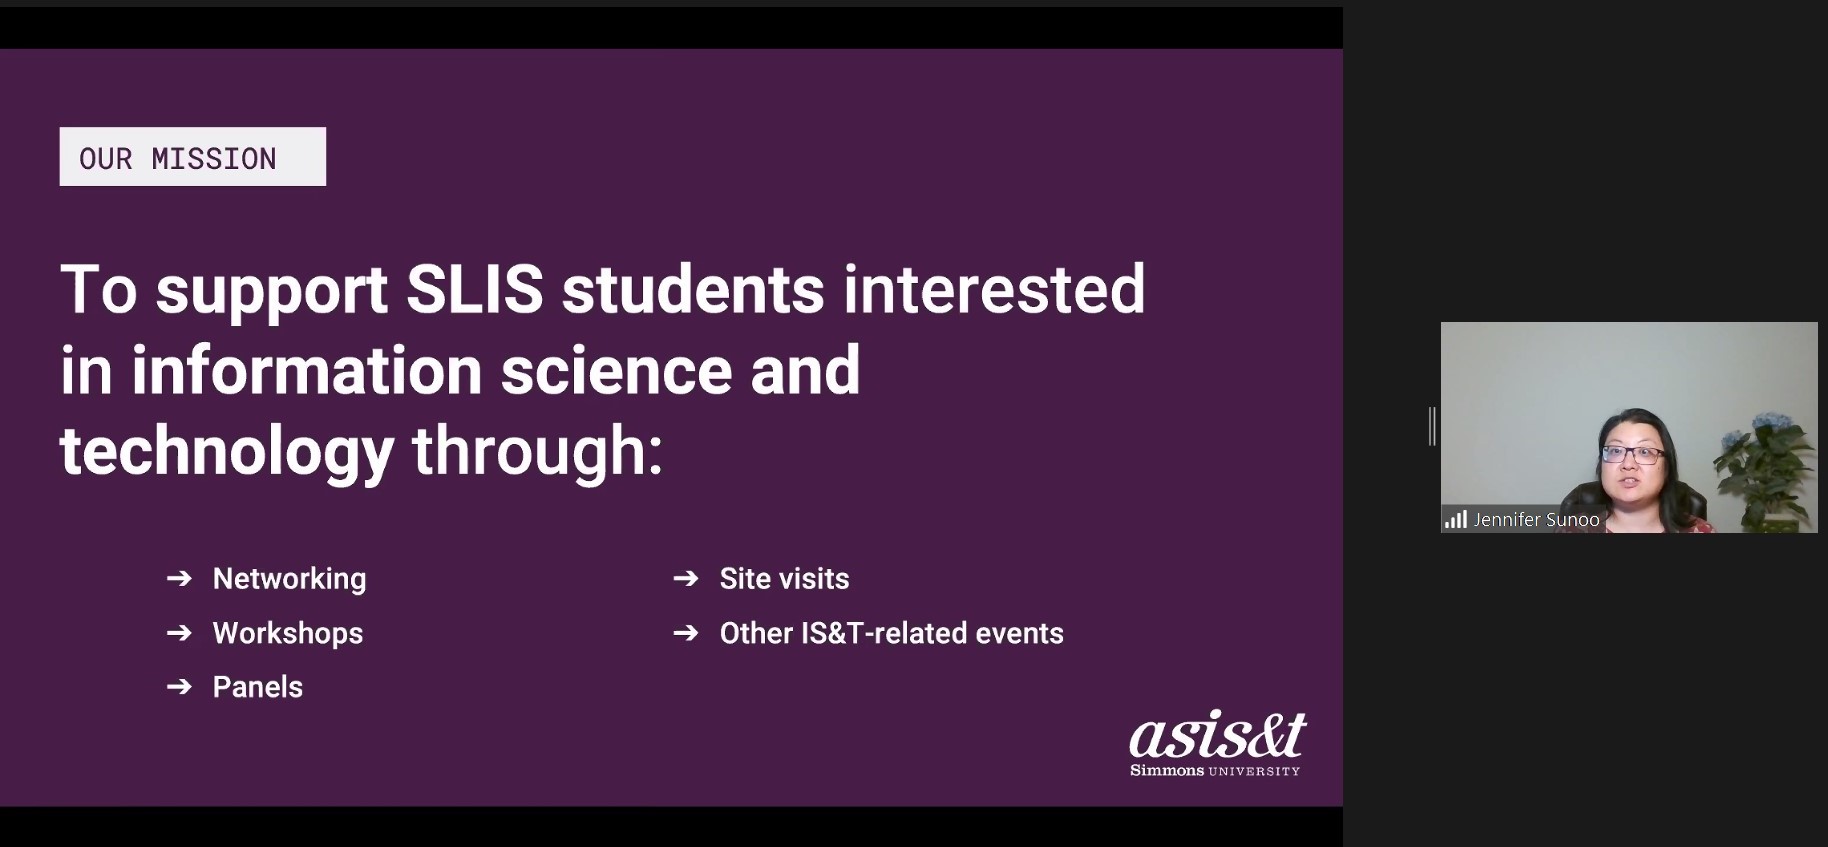 Our Mission: To support SLIS students interested in information science and technology through: networking, workshops, panels, site visits, other IS&T-related events